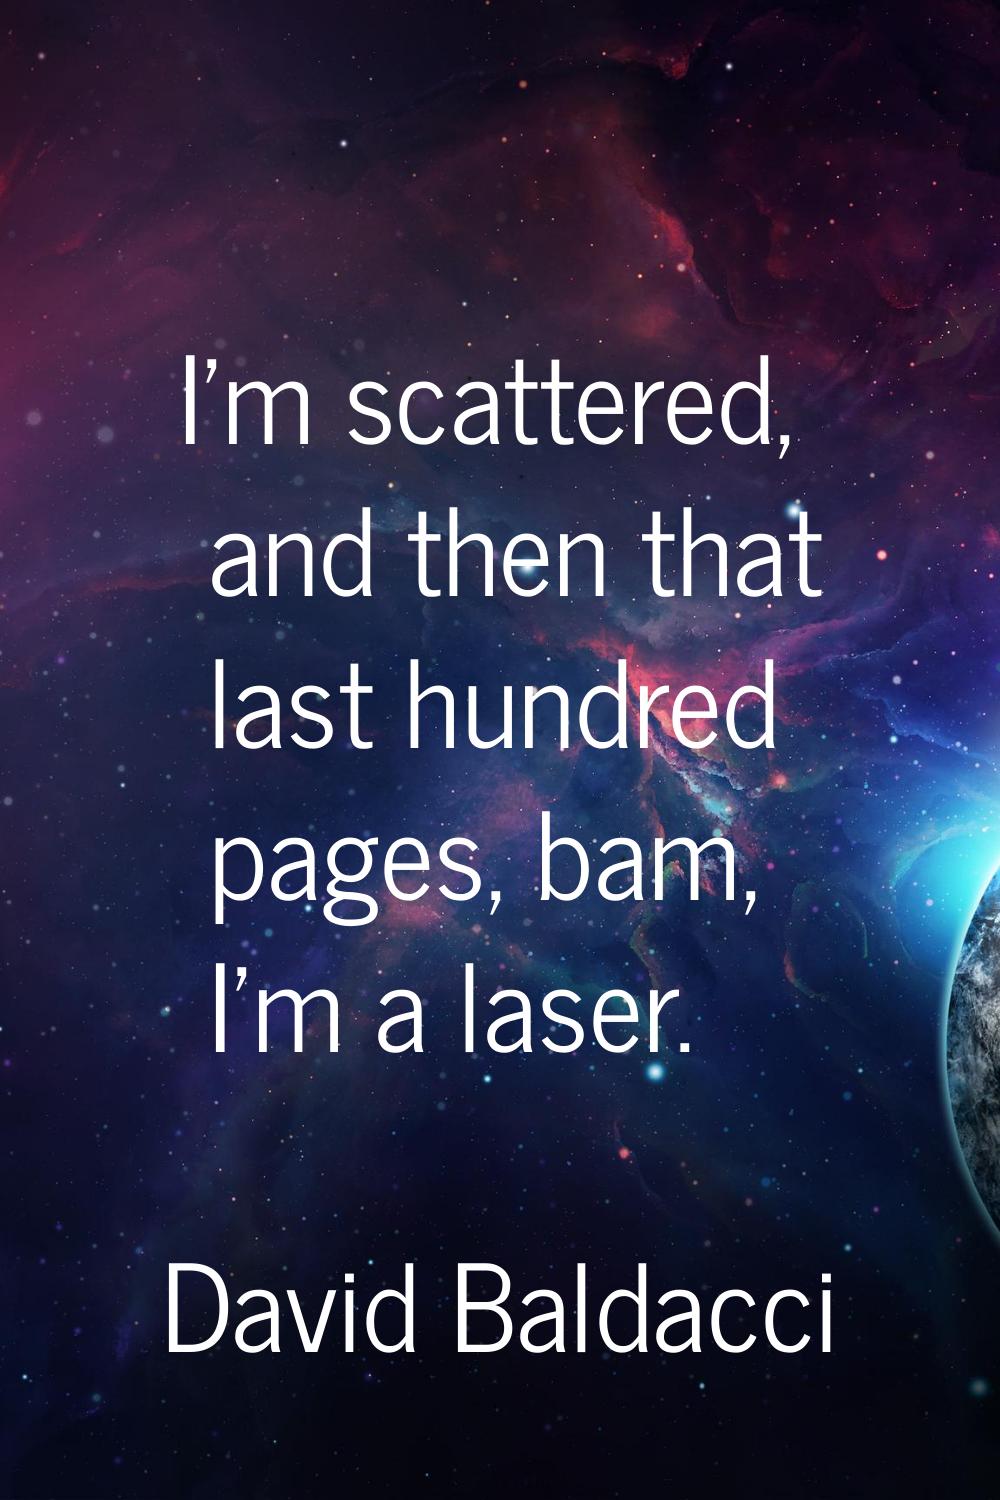 I'm scattered, and then that last hundred pages, bam, I'm a laser.